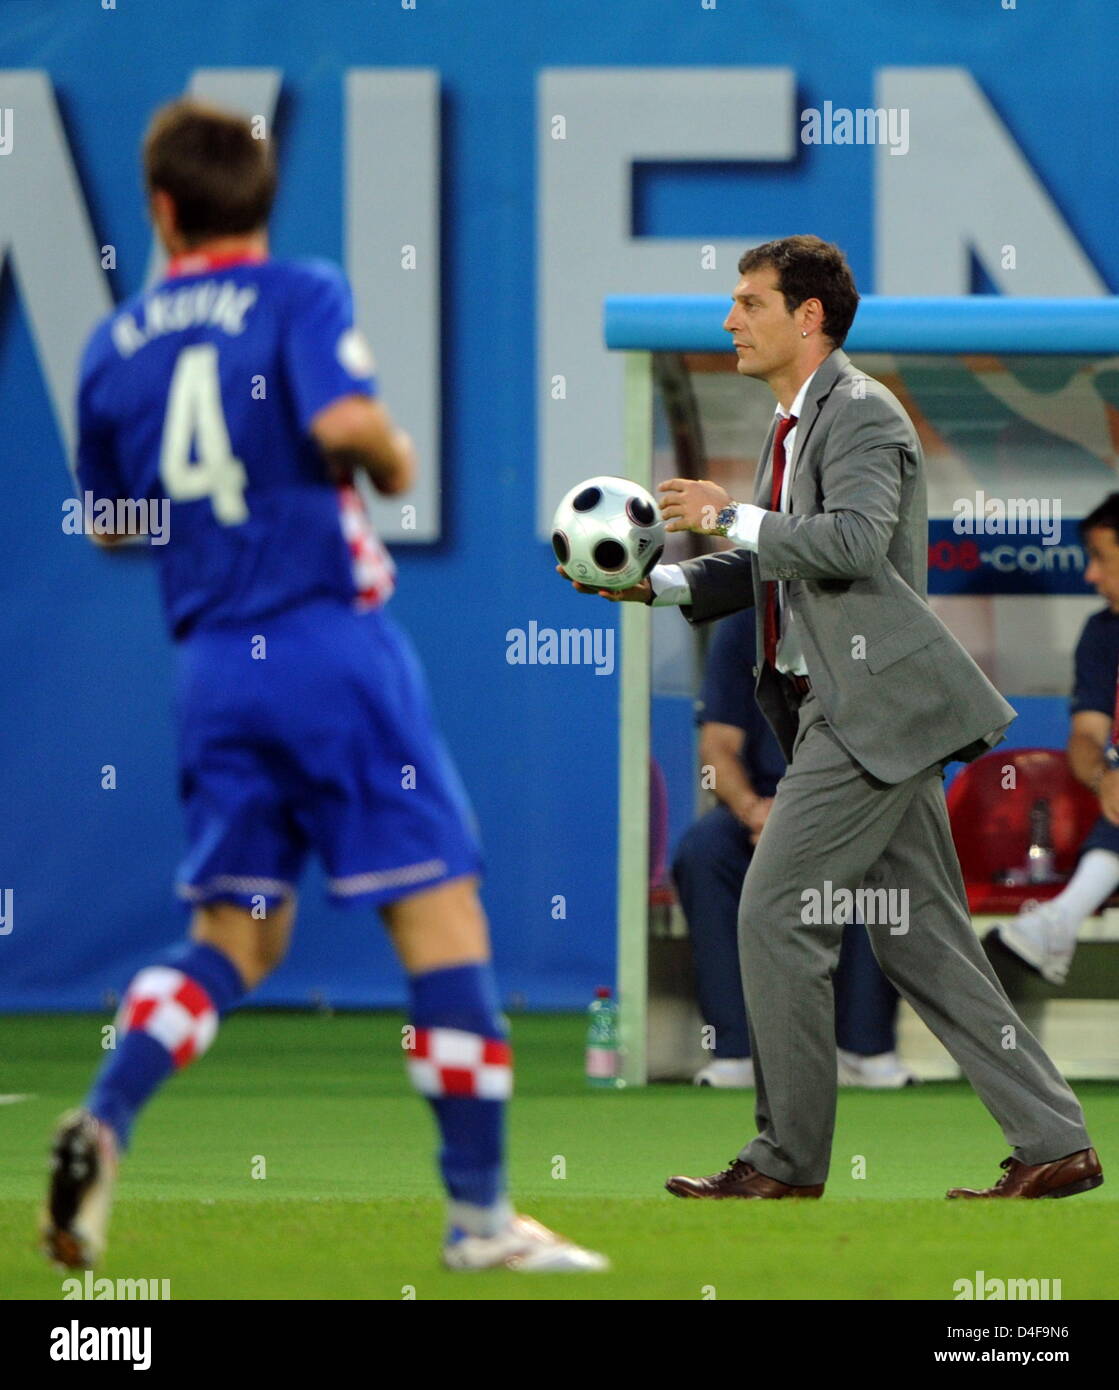 Head coach Slaven Bilic (R) of Croatia holds a ball next to Robert Kovac during the UEFA EURO 2008 quarter final match between Croatia and Turkey at the Ernst Happel stadium in Vienna, Austria, 20 June 2008. Photo: Achim Scheidemann dpa +please note UEFA restrictions particulary in regard to slide shows and 'No Mobile Services'+ +++(c) dpa - Bildfunk+++ Stock Photo